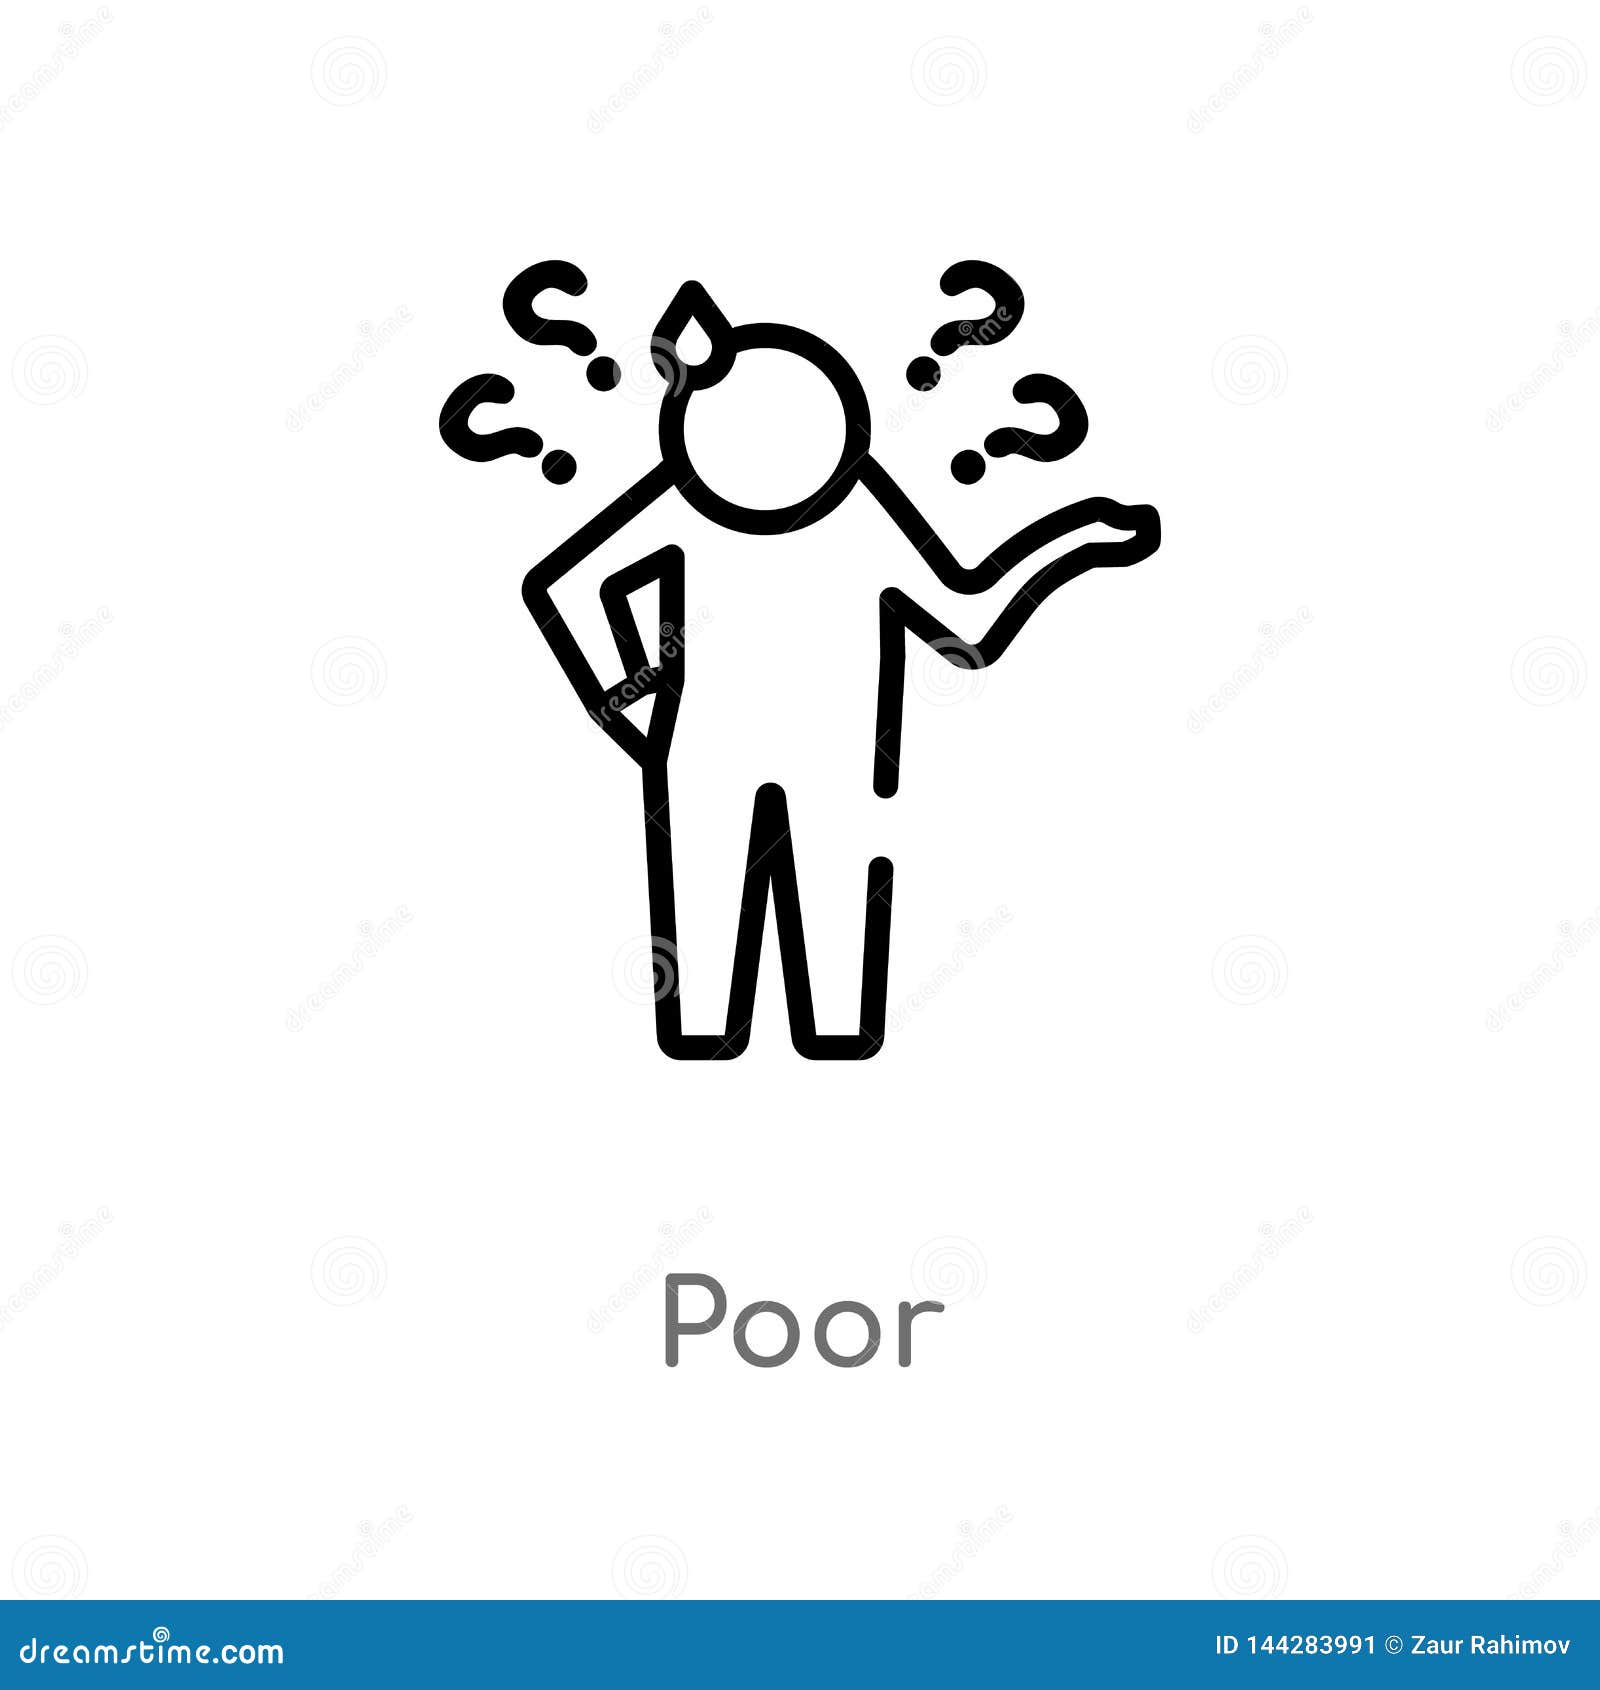 poor people icon